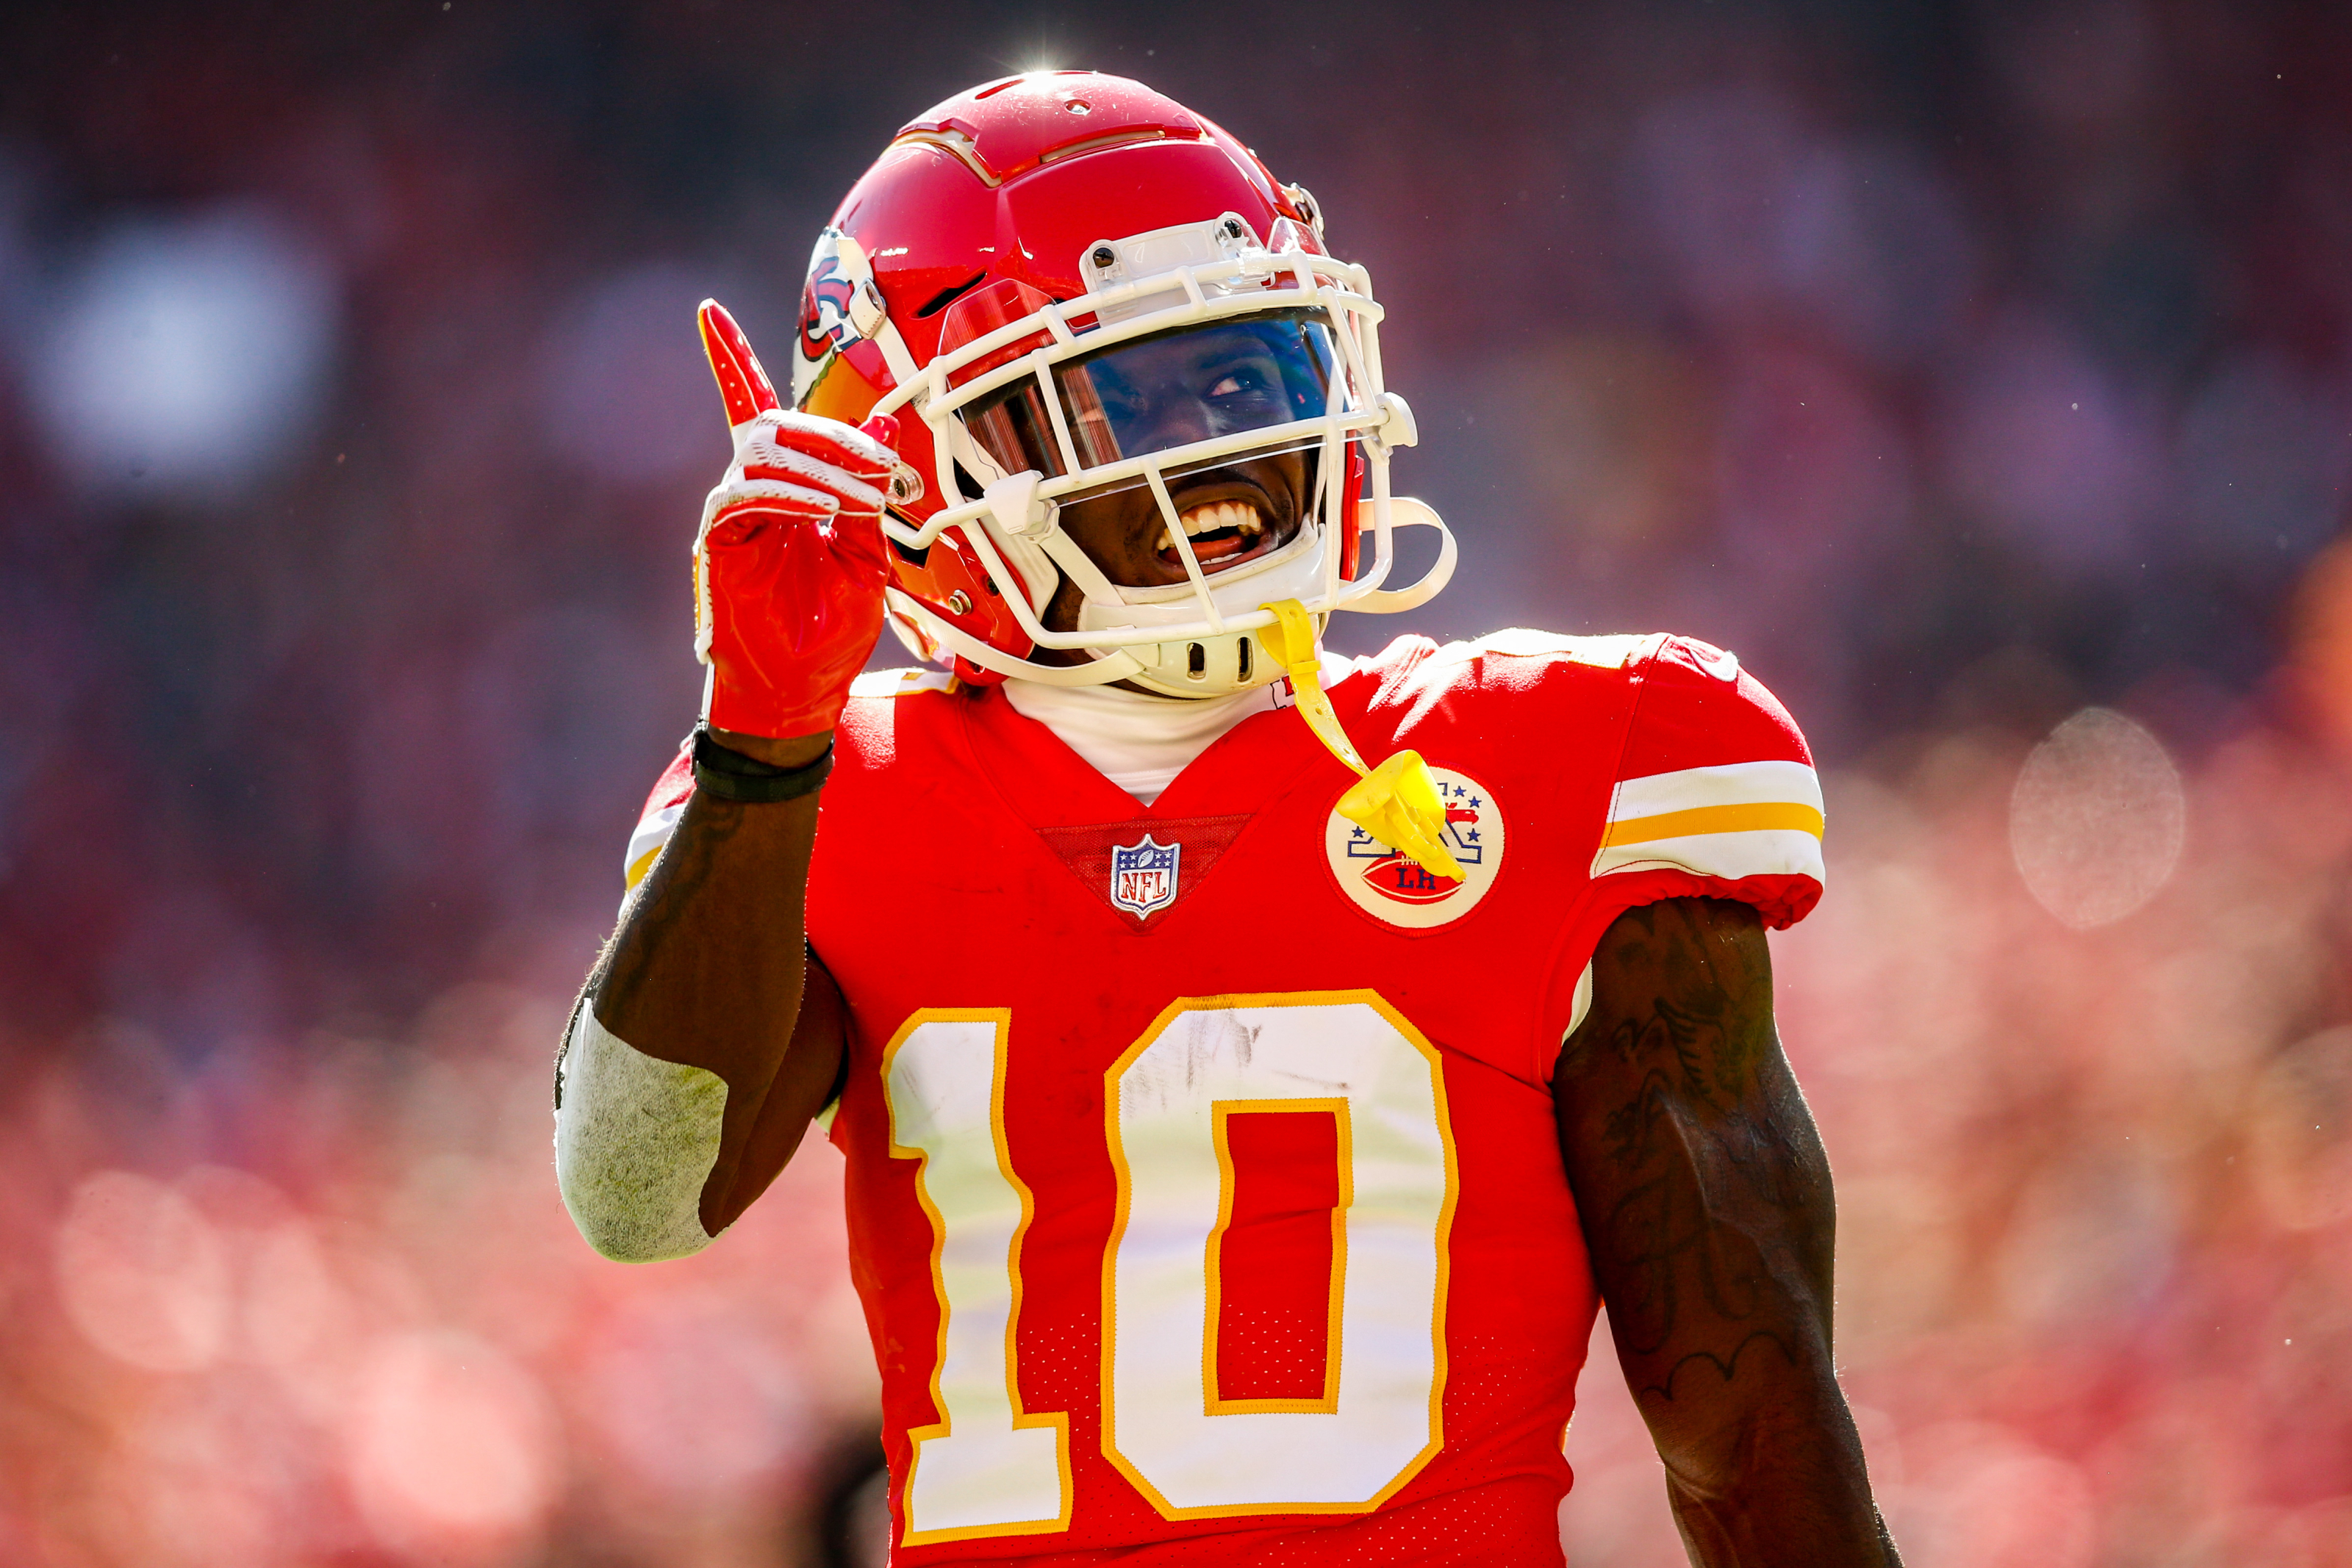 Tyreek Hill comes in at No. 19 on NFL's players for 2019